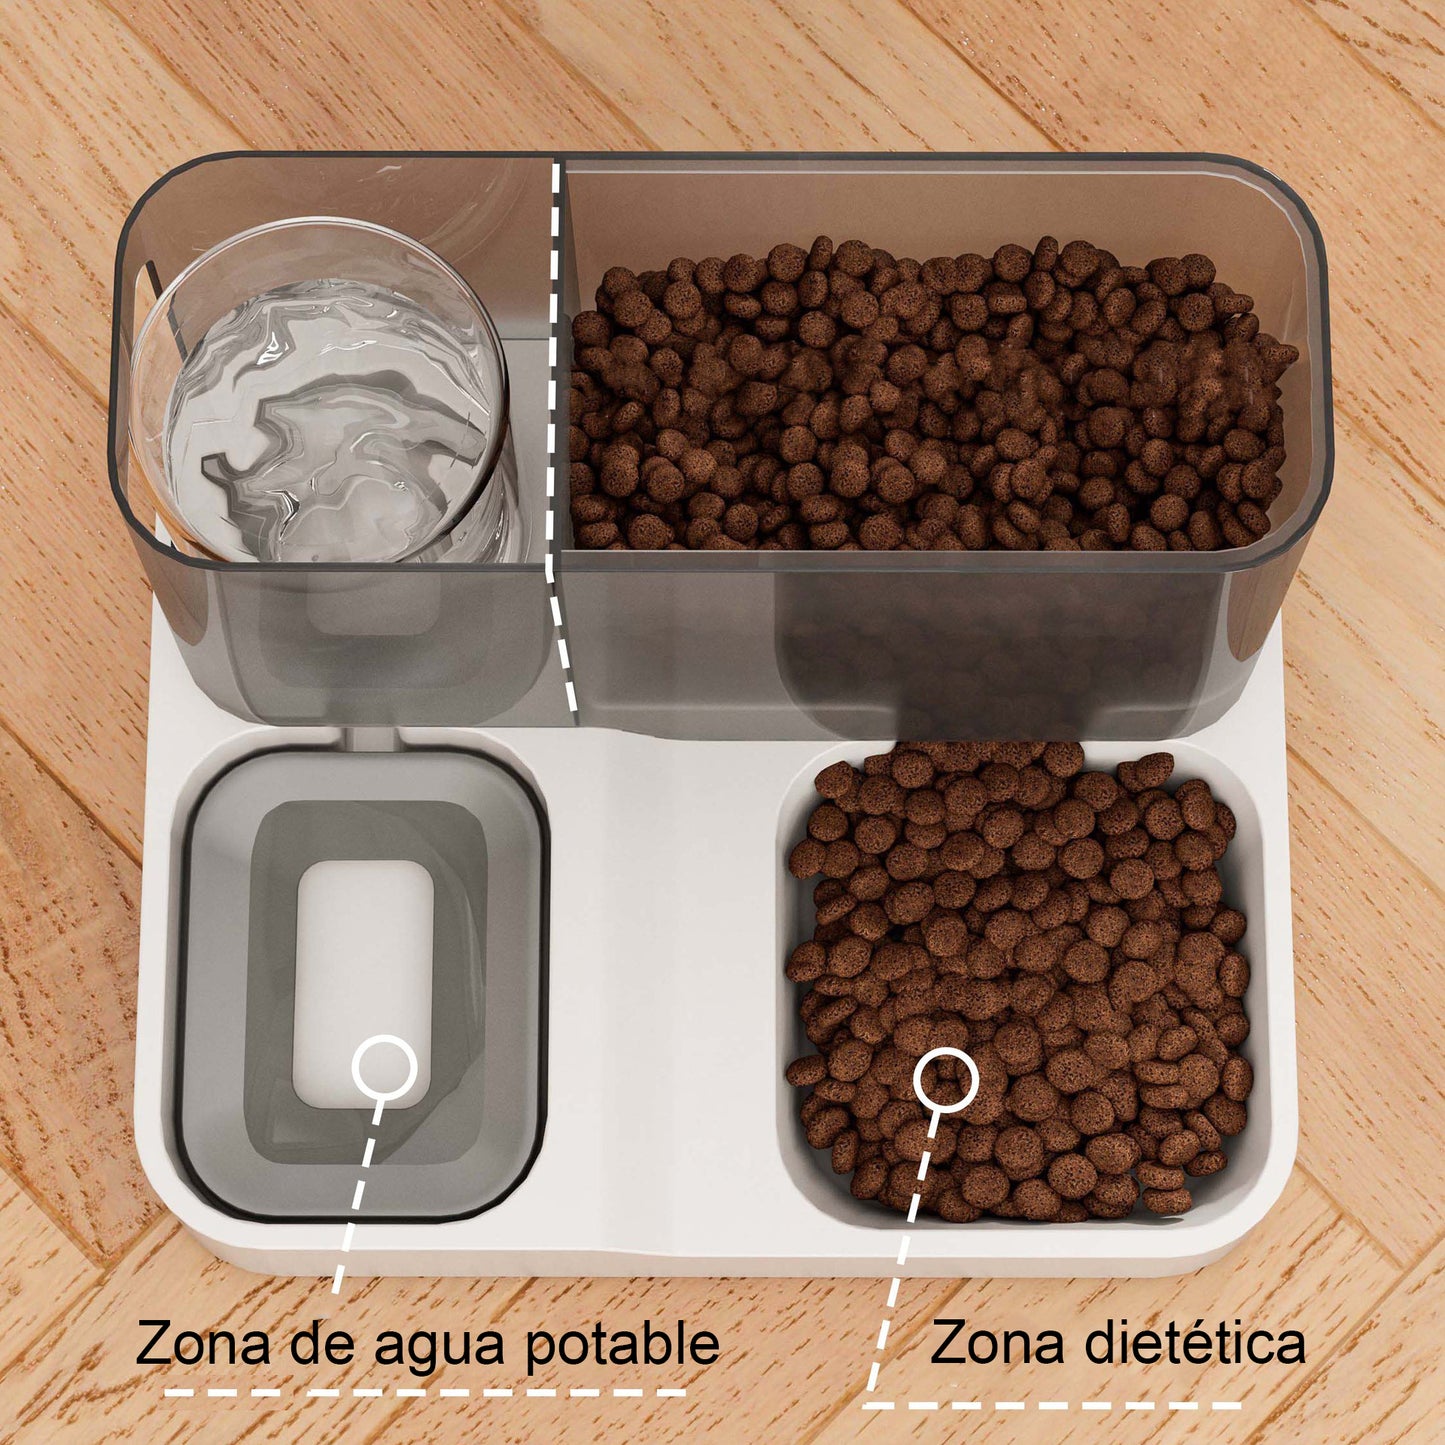 Convenient Automatic Cat and Dog Feeders Pet Feeders Pet Drinking Water Boxes